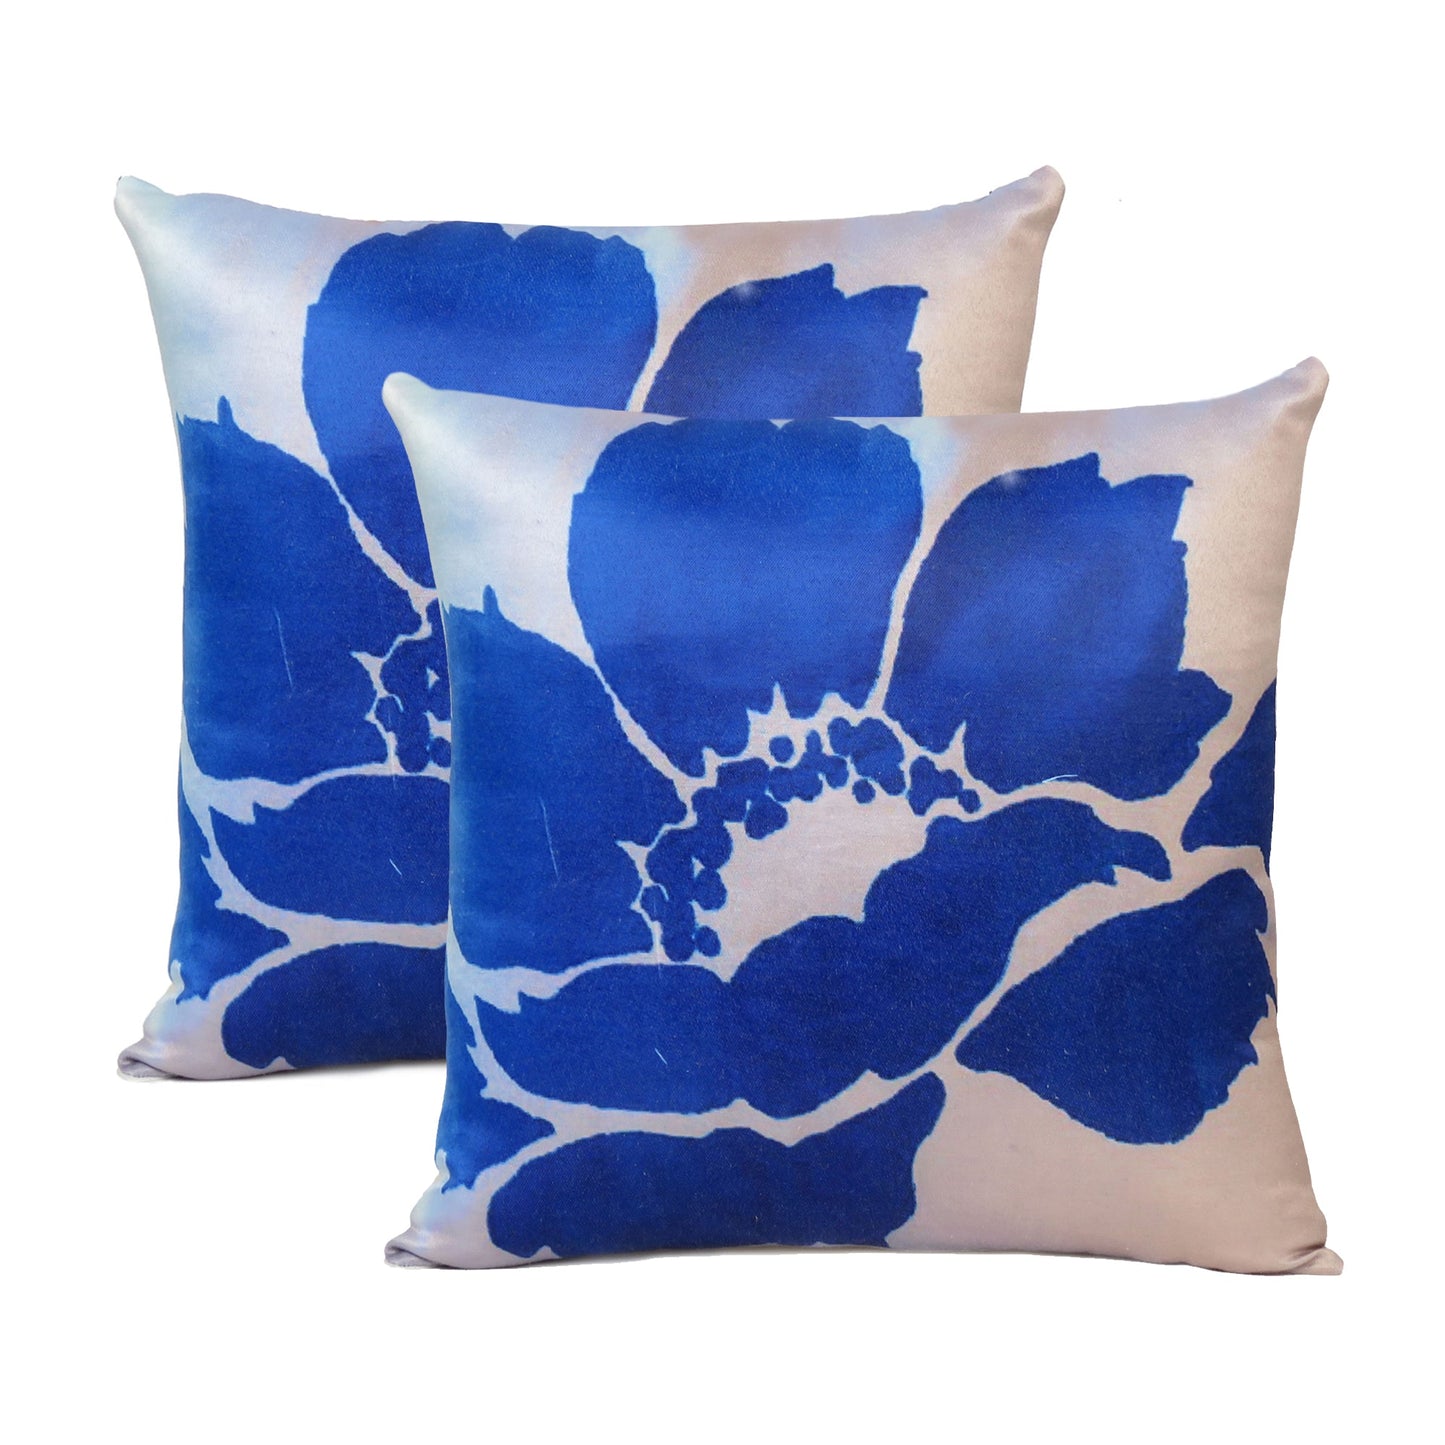 Blue Floral Printed Cushion Cover in Set of 2